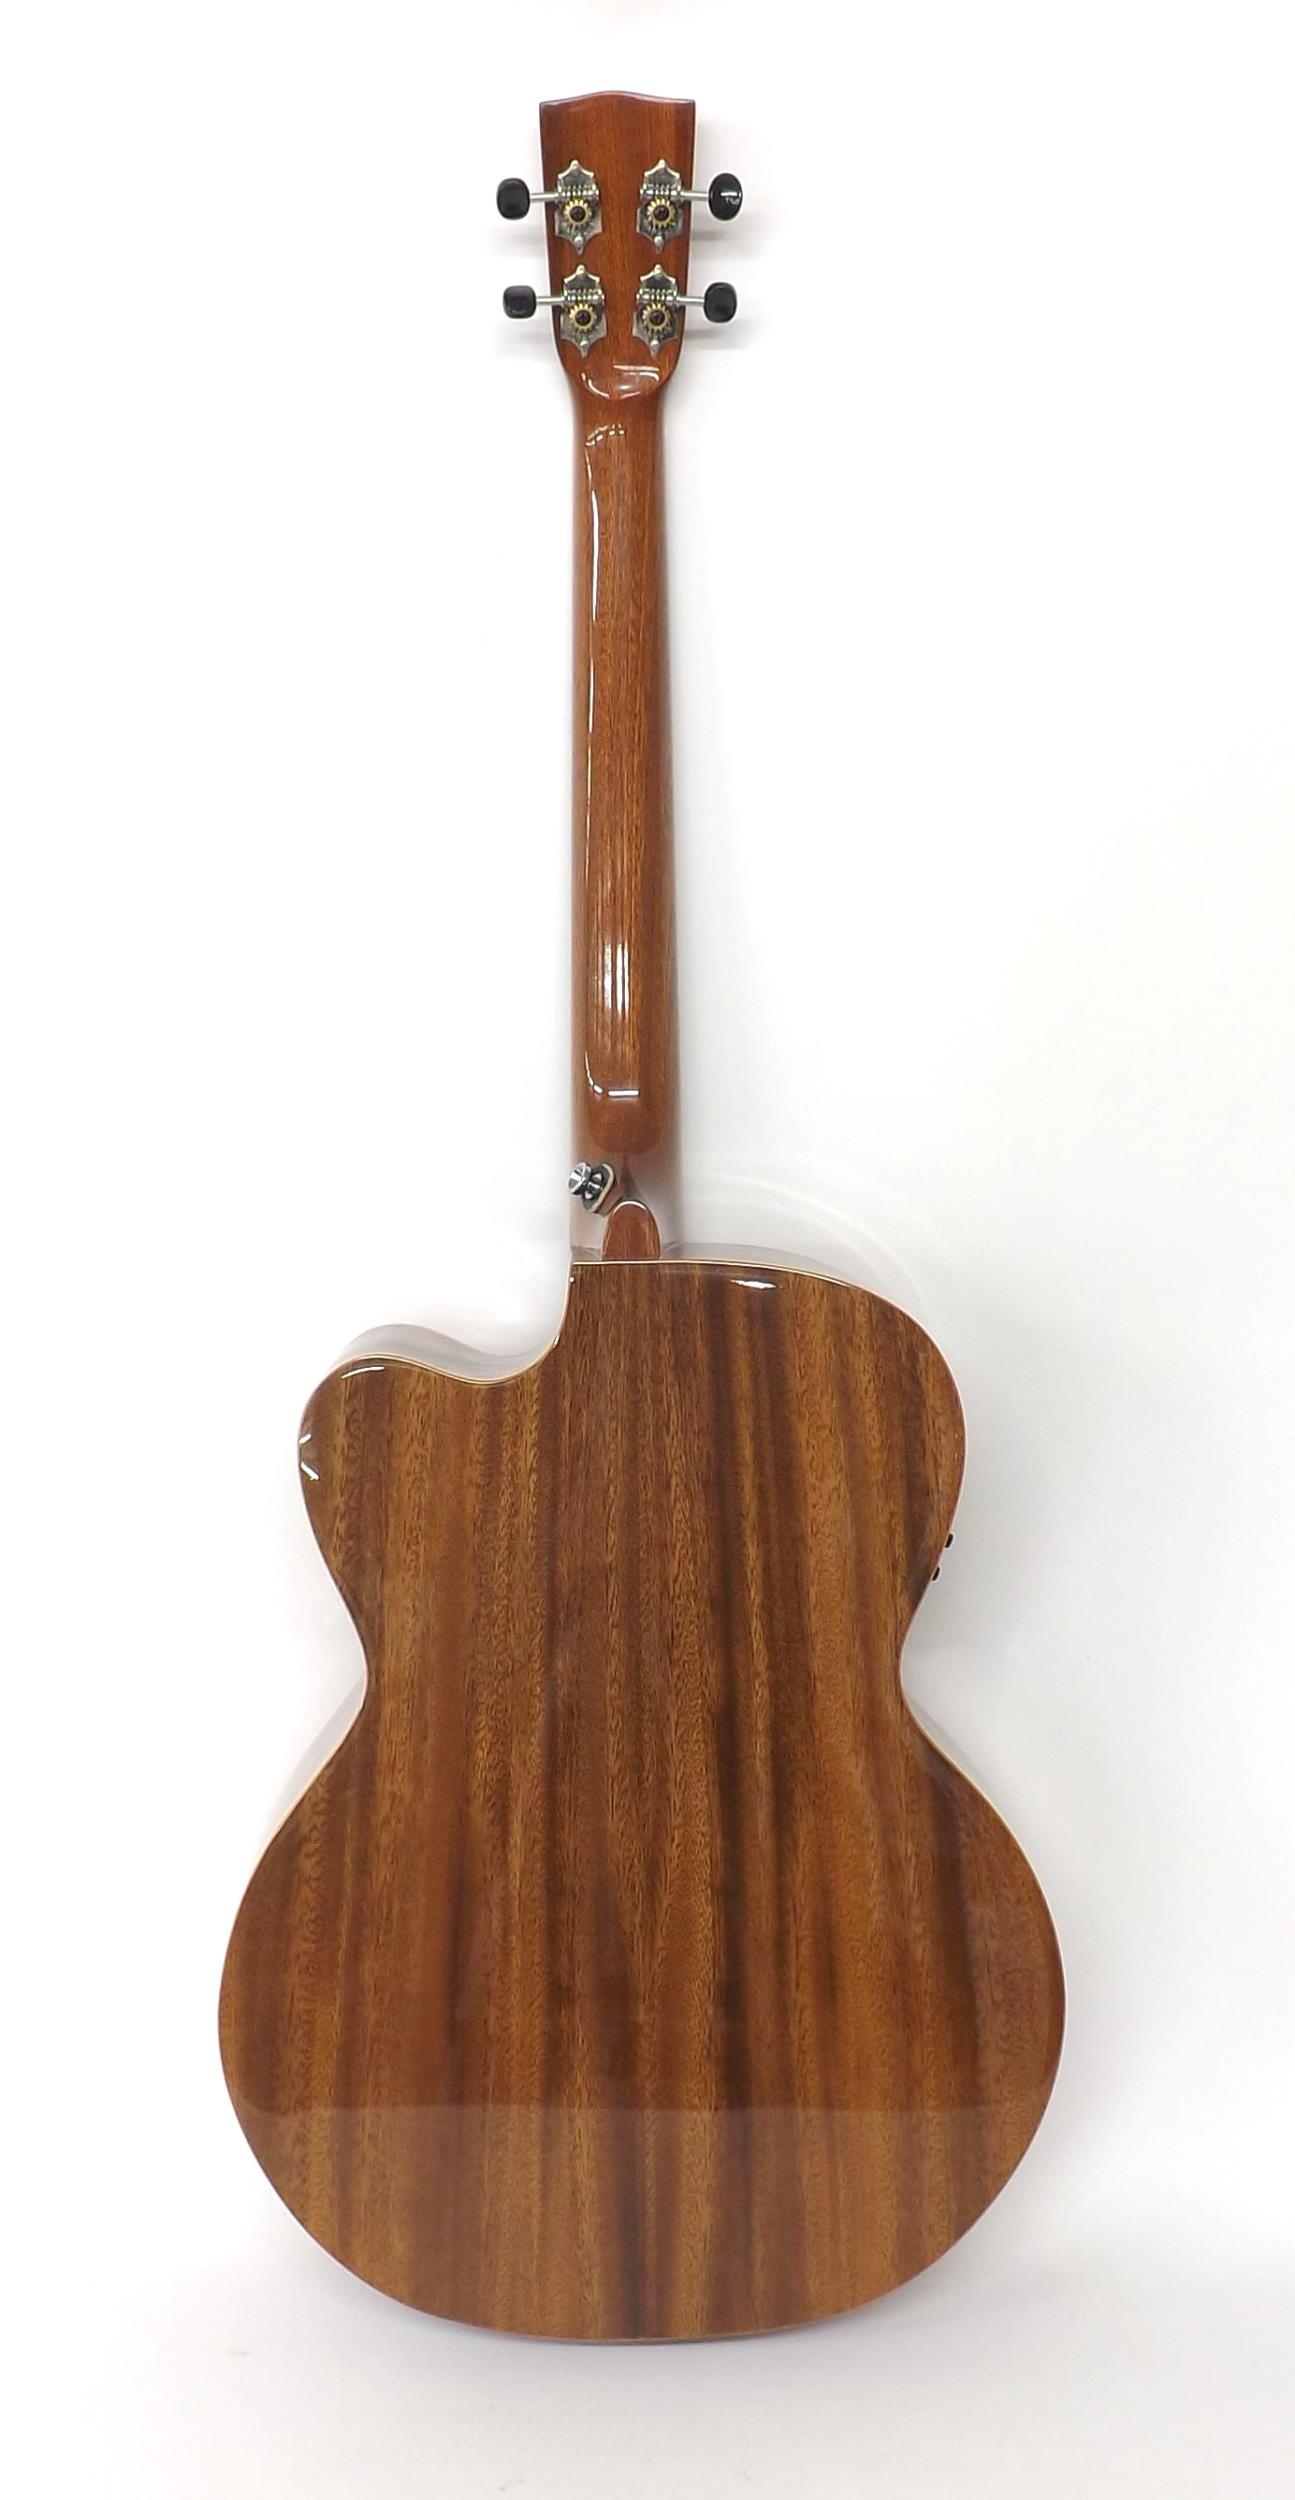 Contemporary classical guitar by and labelled Ashbury, model no: Lindisfarne, with cut-away shaped - Image 2 of 3